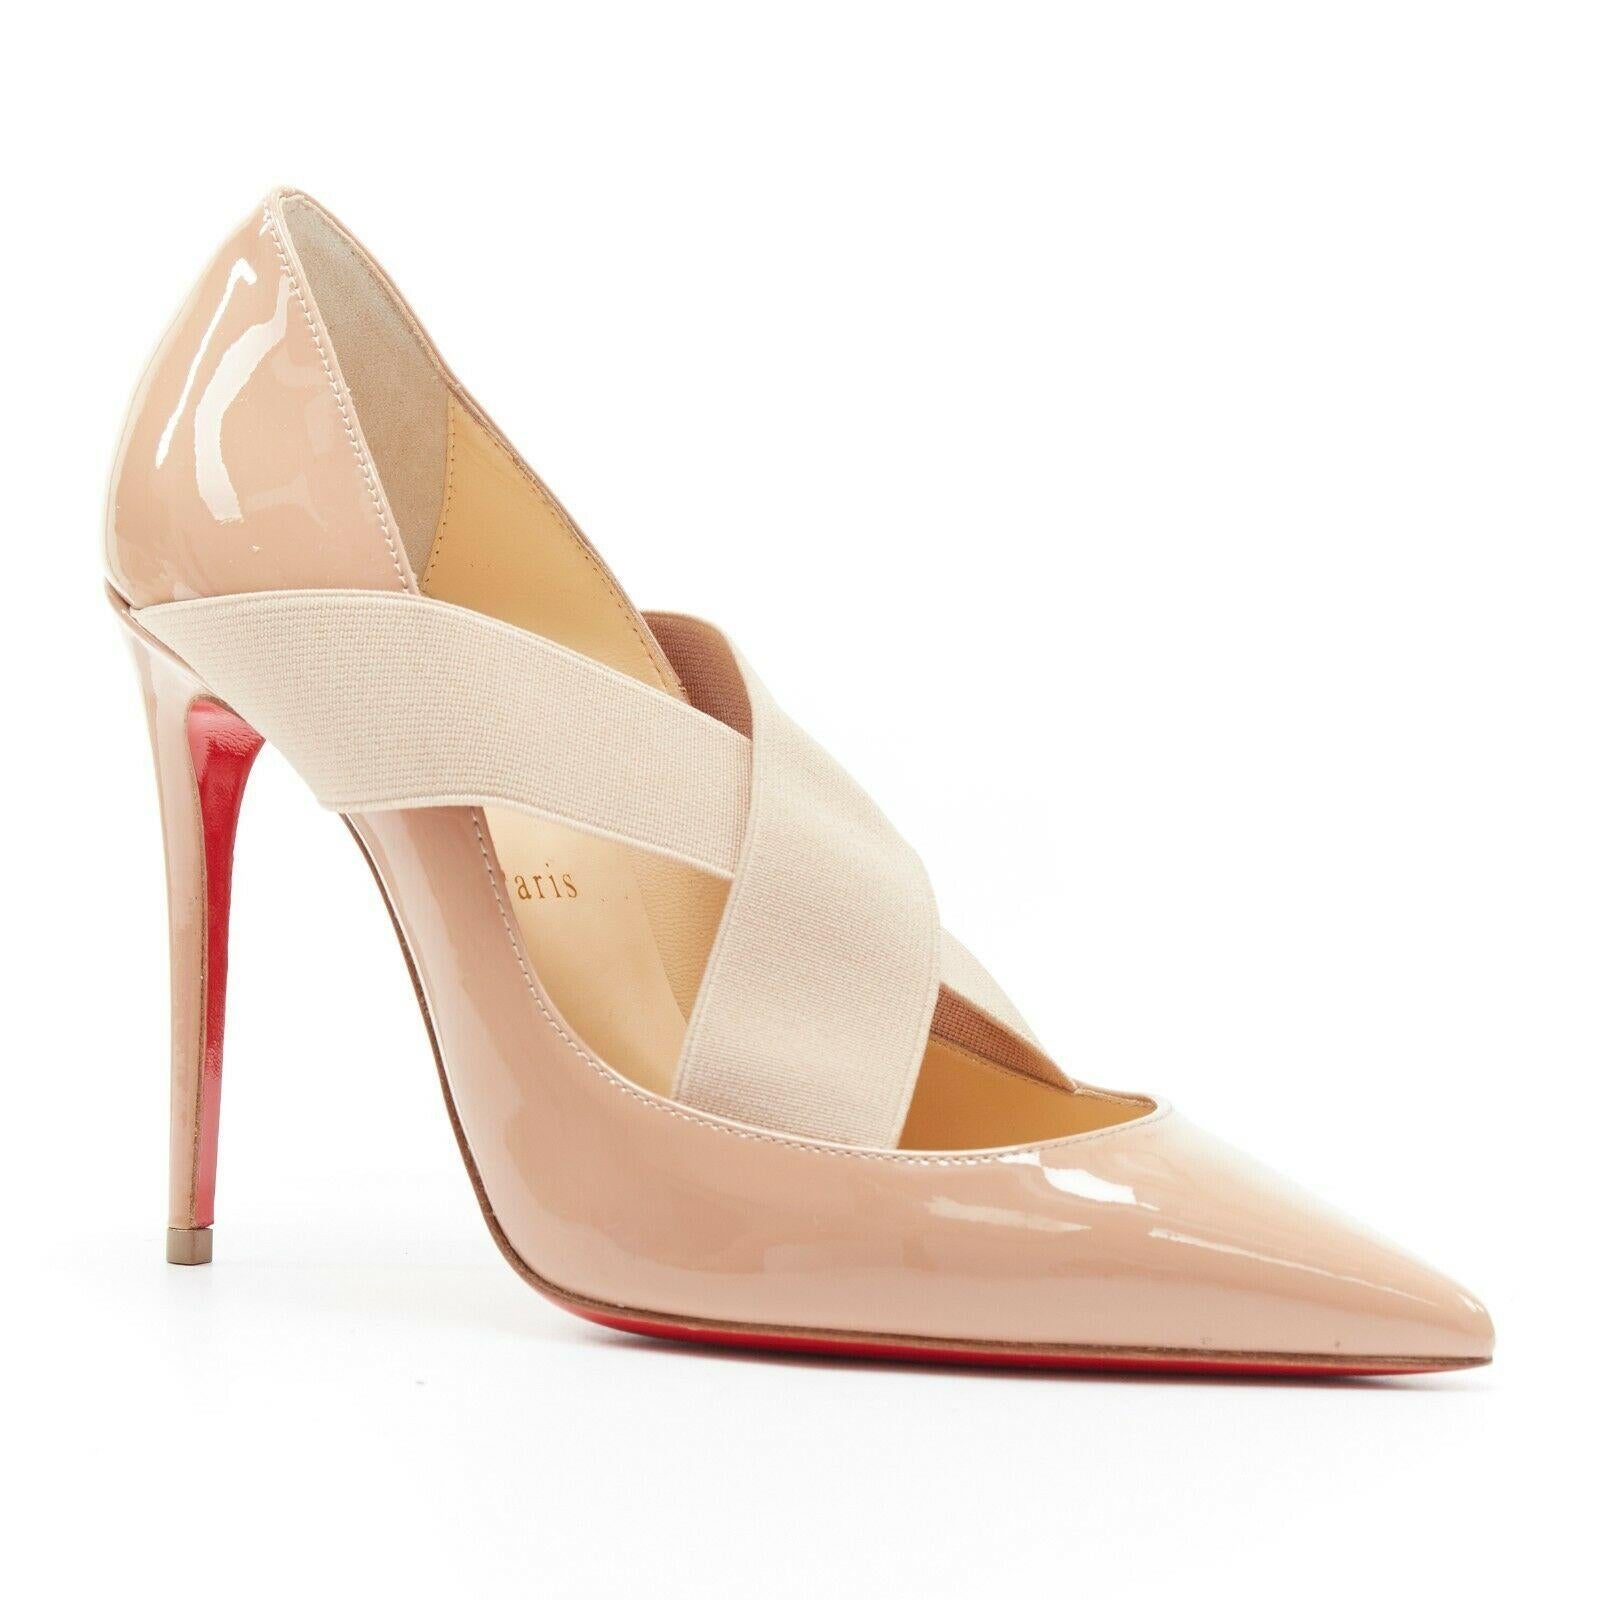 new CHRISTIAN LOUBOUTIN Sharpstagram 100 nude cross strap pointy pigalle EU36
CHRISTIAN LOUBOUTIN
Sharpstagram 100. 
Nude patent leather upper. 
Nude elasticated criss cross straps at vamp. 
Pointed toe. 
Stiletto heel. 
Padded tan leather lining.